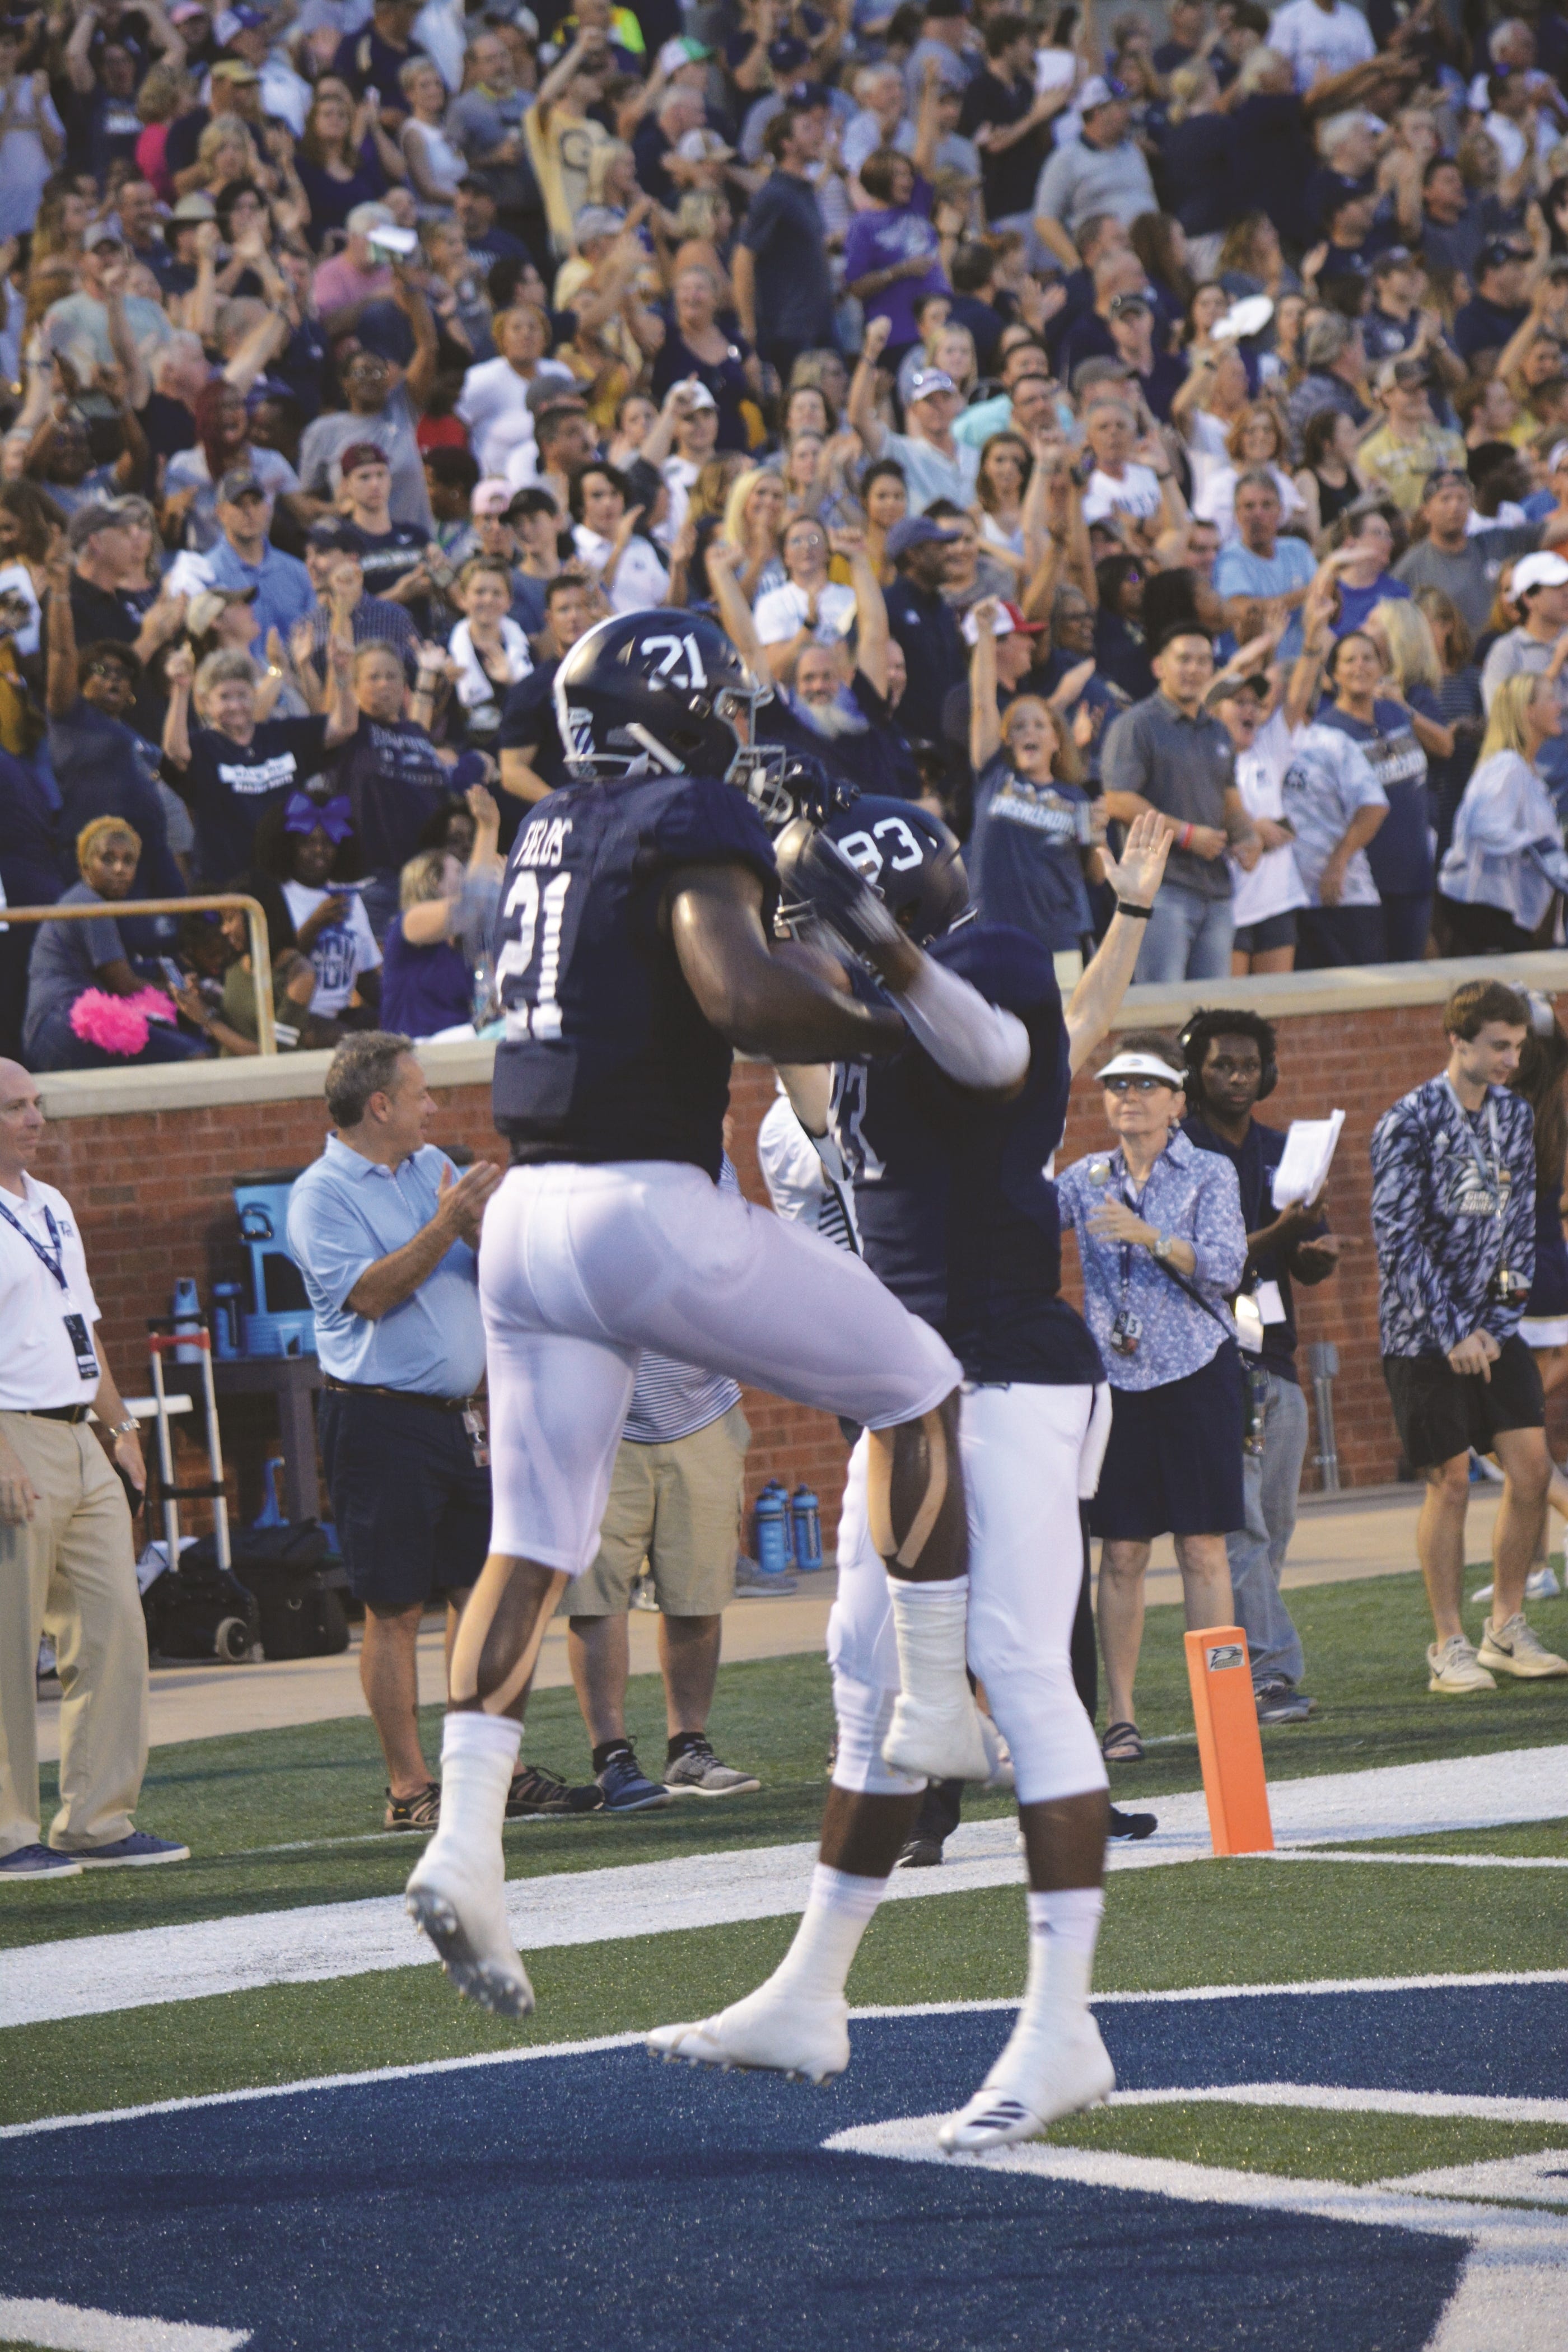 After Saturday's win, Georgia Southern's season has officially changed